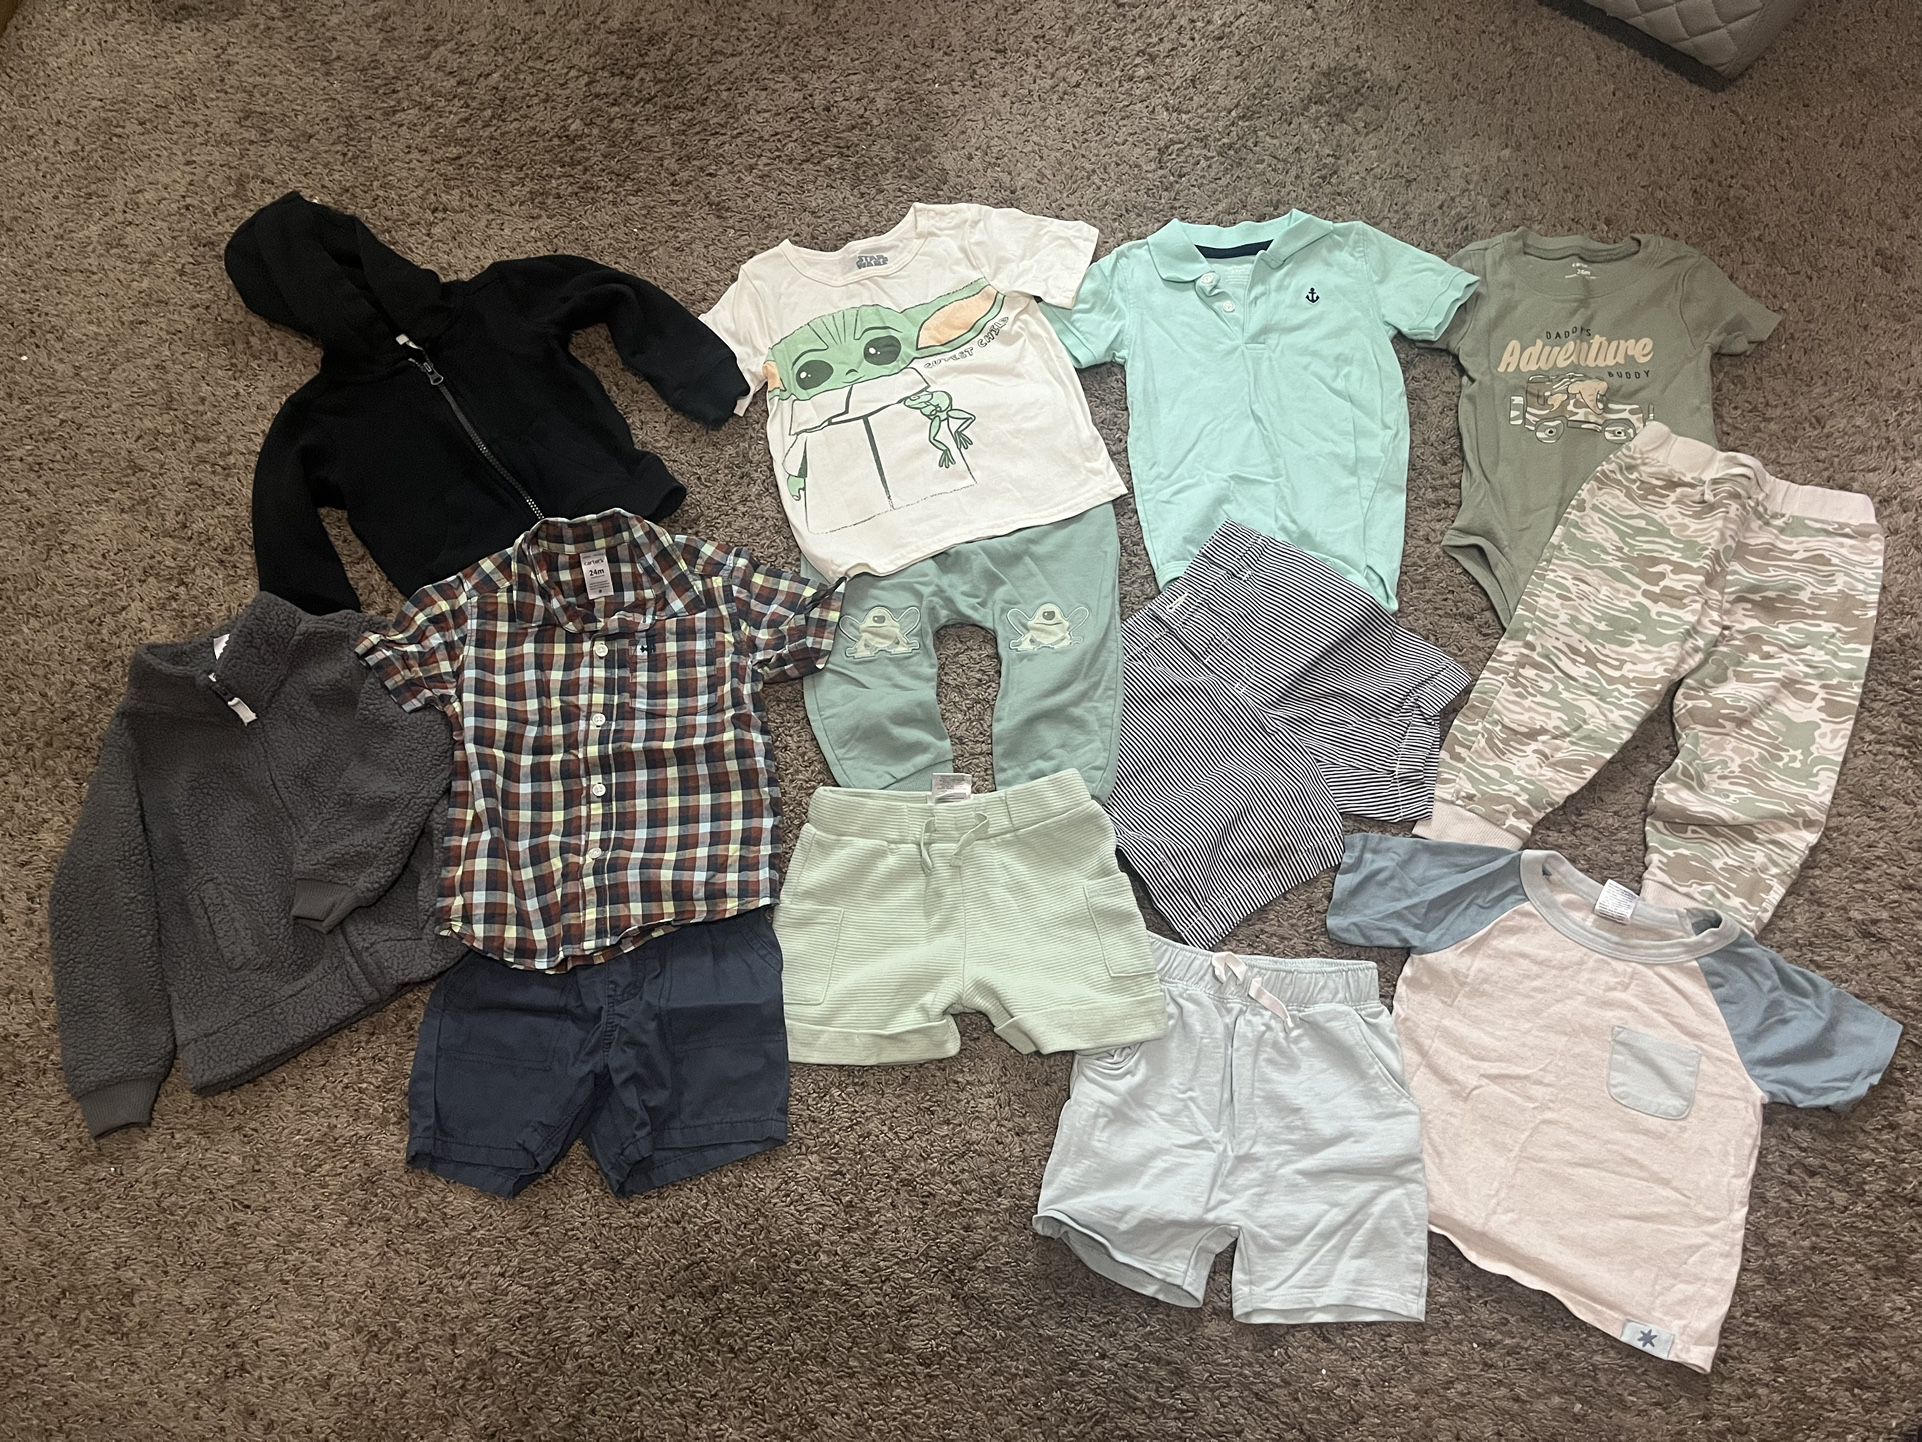 Boys Clothes Size 24 Month Lot Whole Wardrobe 